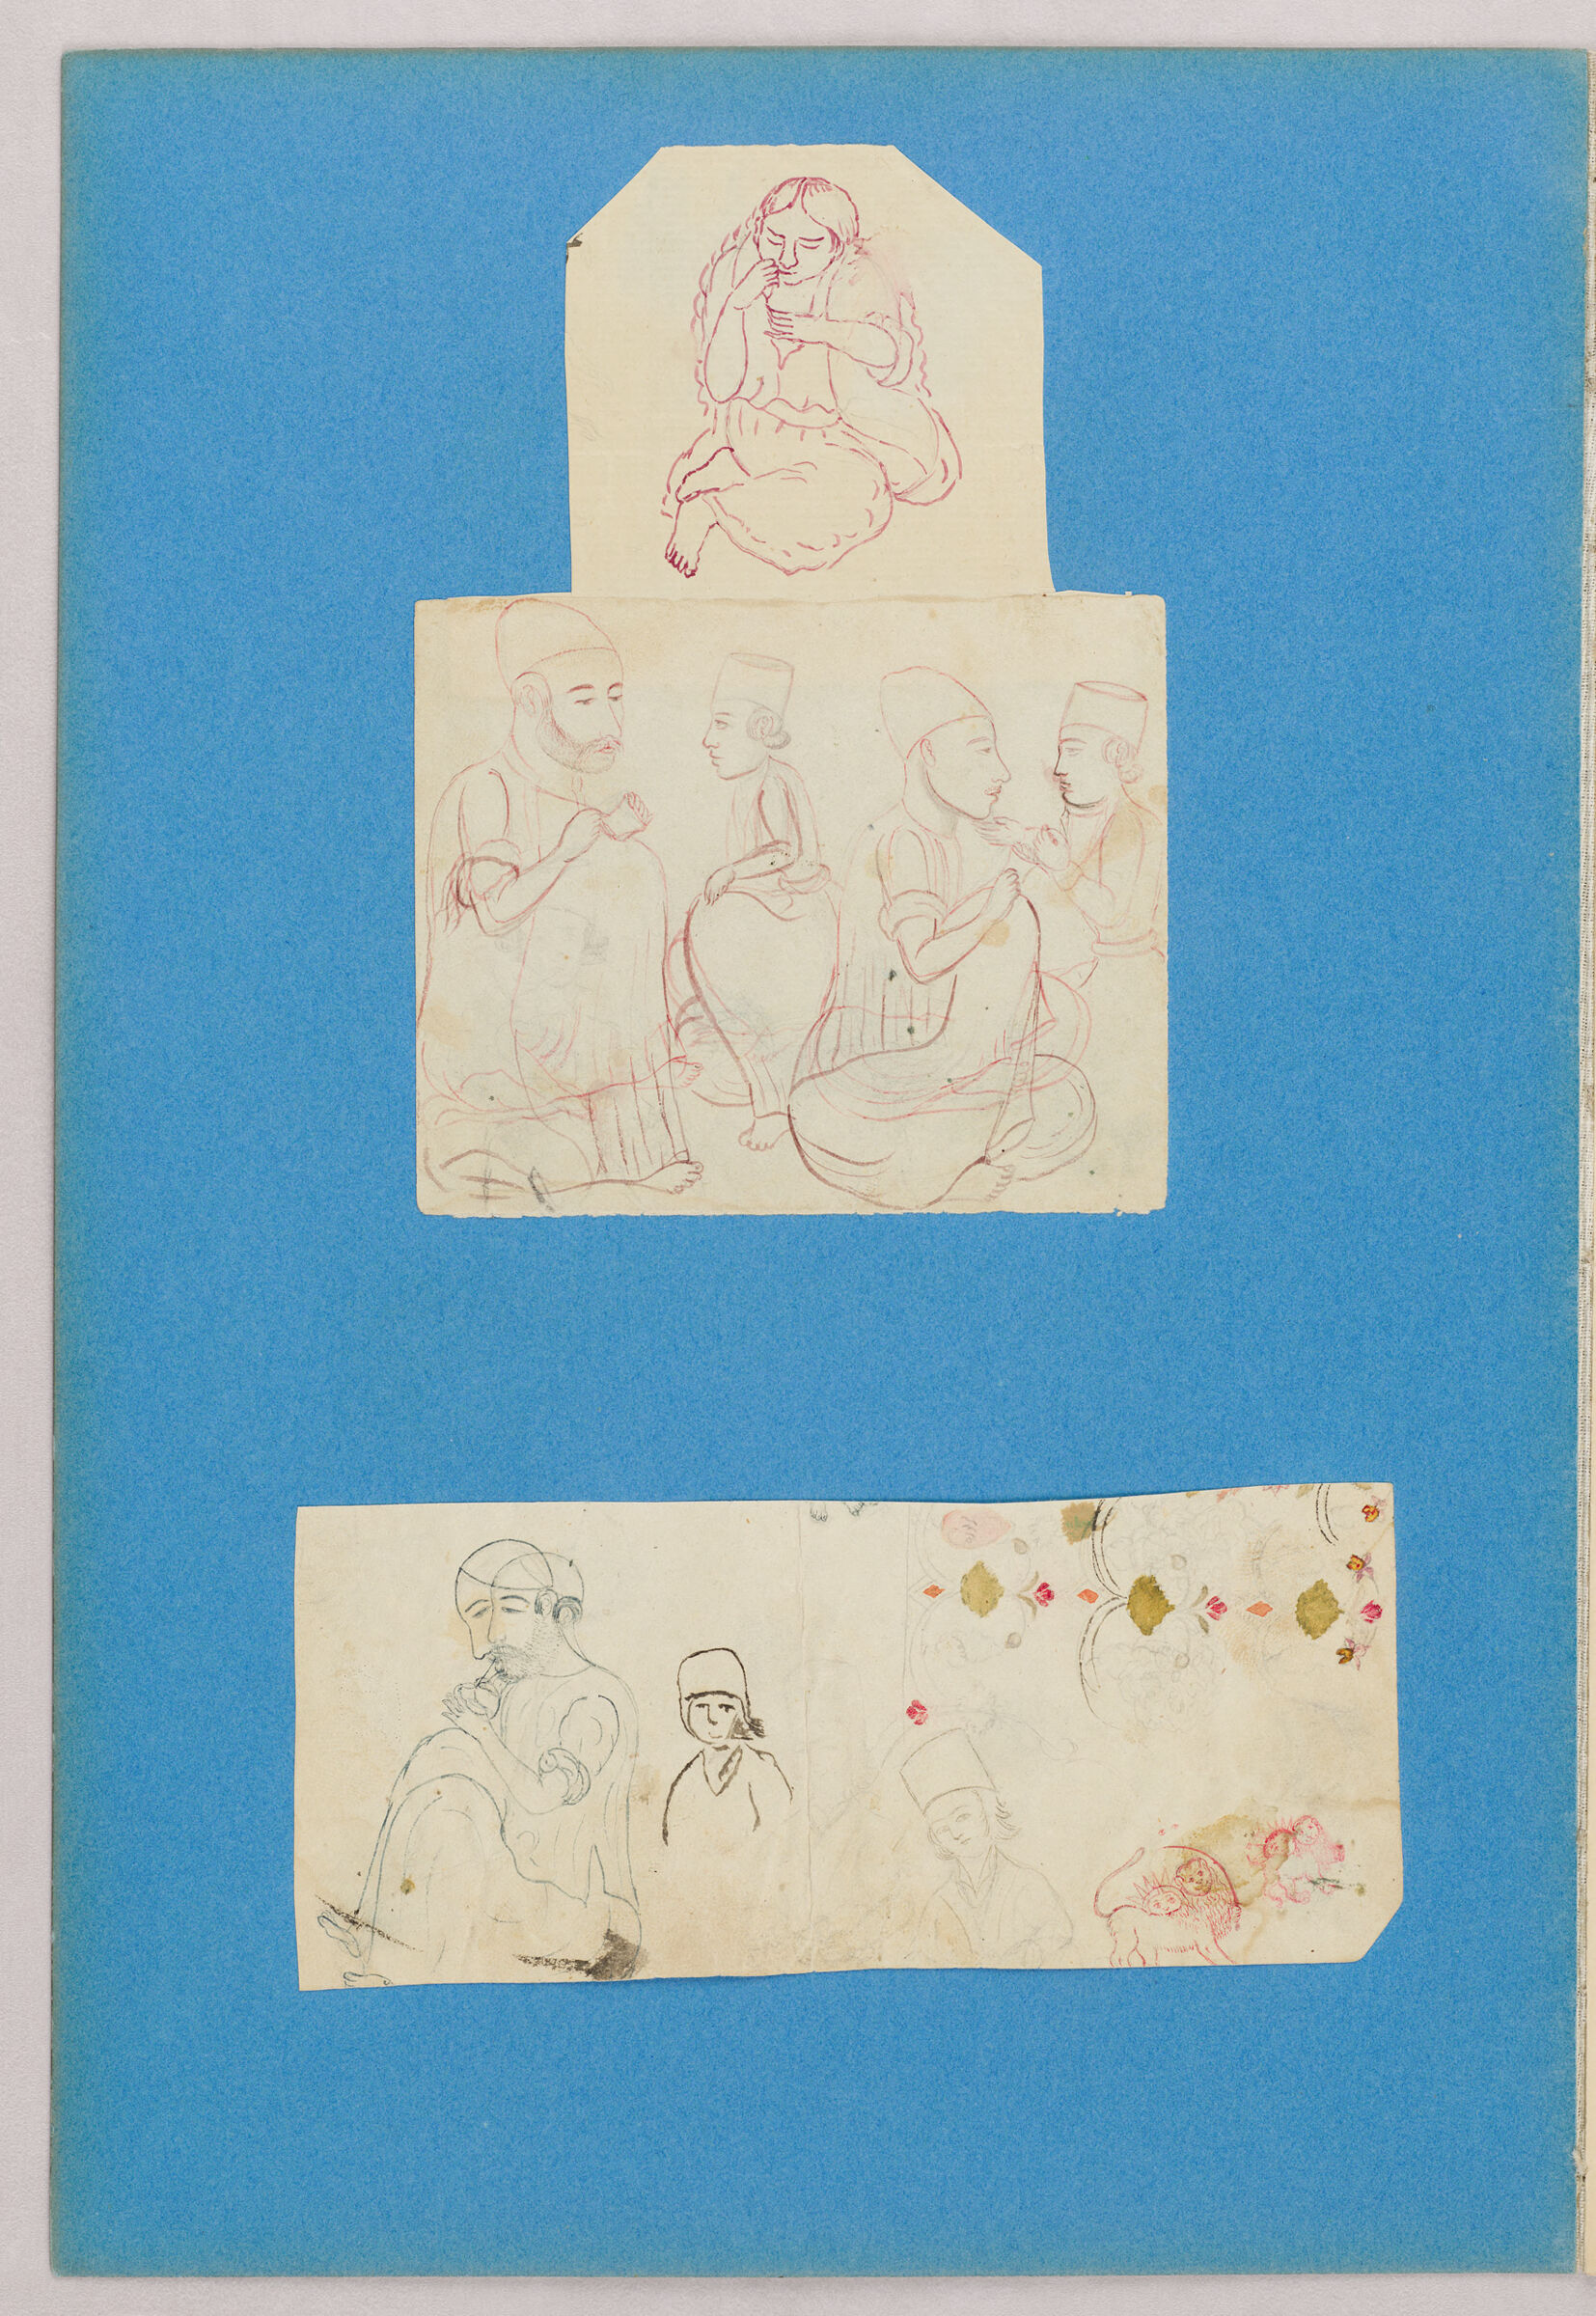 Folio 38 From An Album Of Drawings And Paintings: Three Sheets With Sketches Of People, And Sun And Lion Motifs (Recto); Blank Page (Verso)